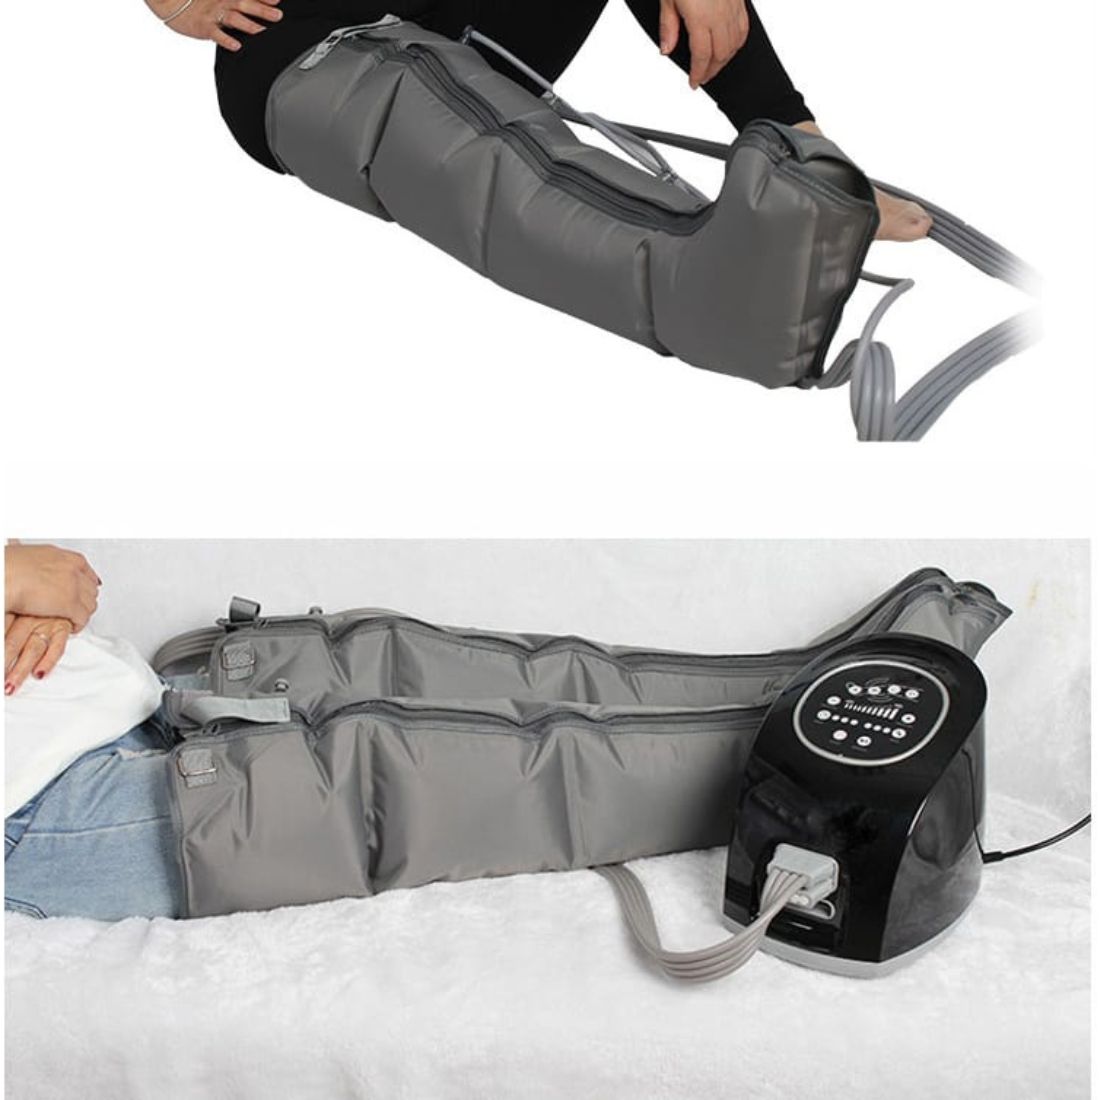 DVT Compression Therapy Machine with 2 Legs Cuff